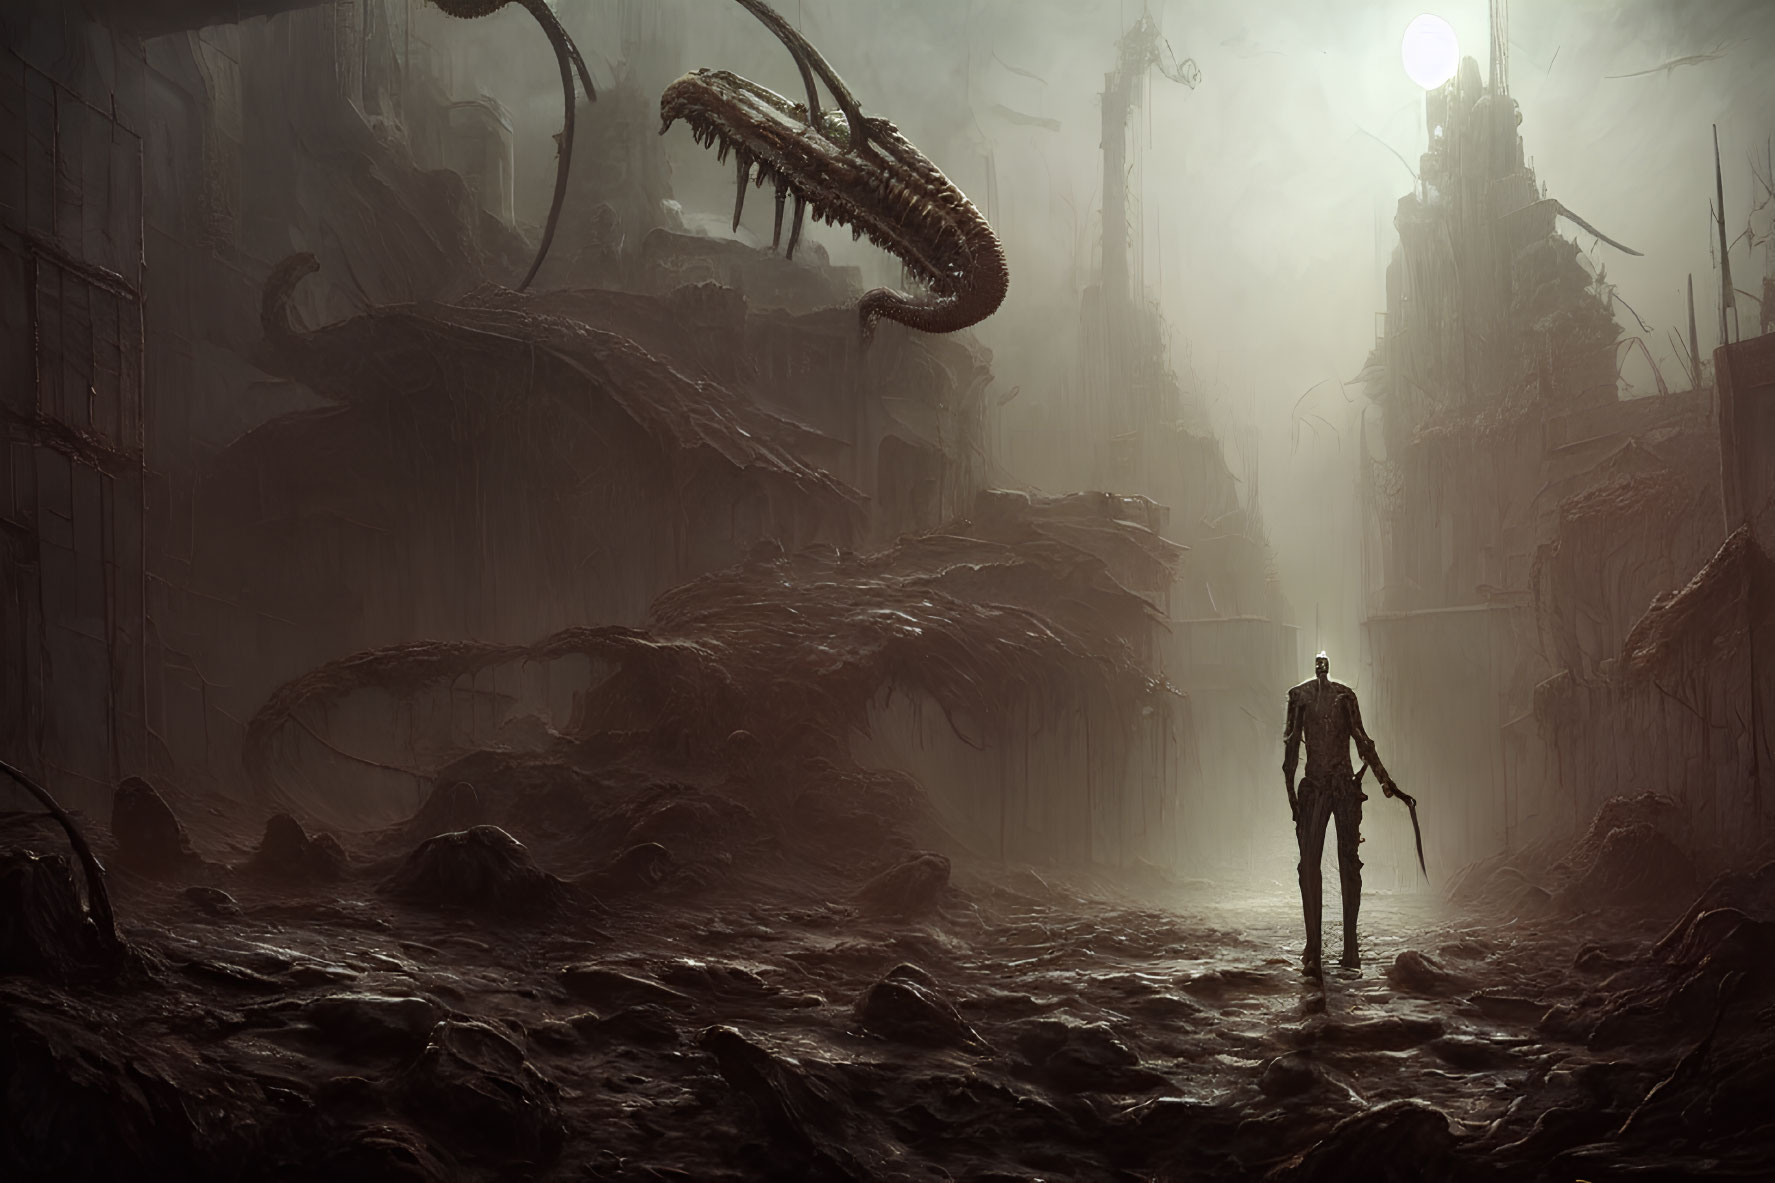 Lone figure in dystopian cityscape with ruin and monstrous creature.